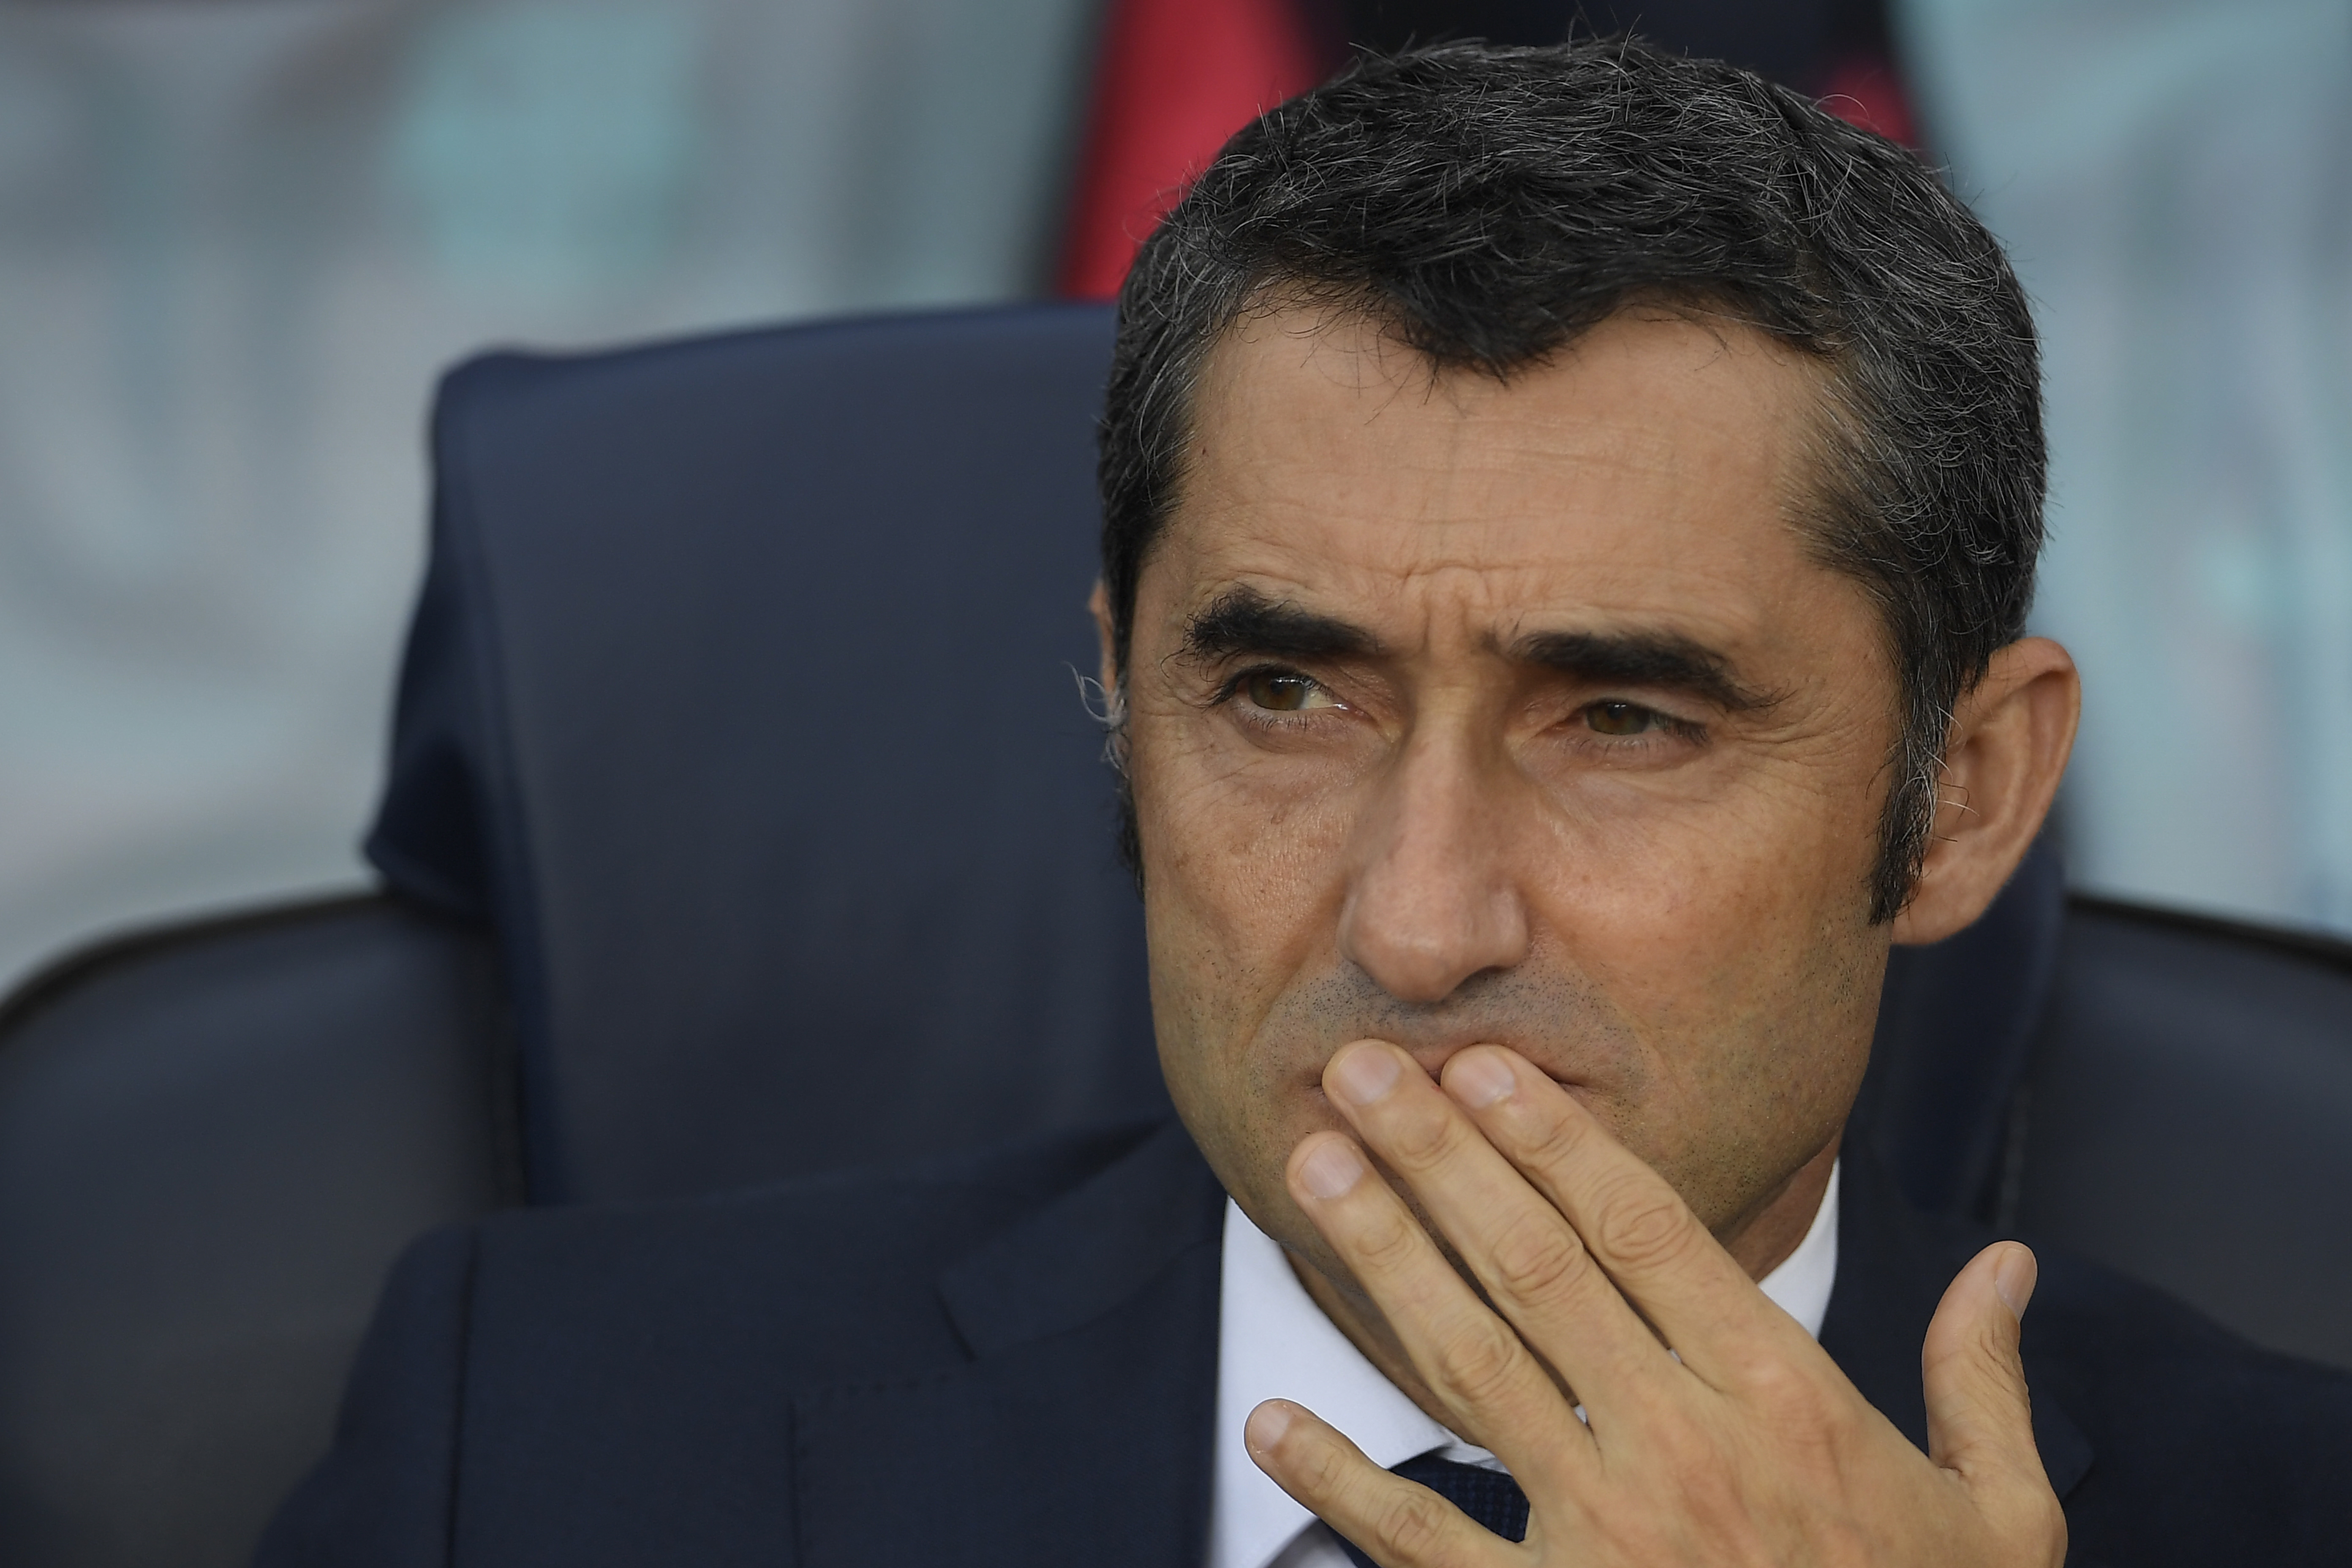 Barcelona's Spanish coach Ernesto Valverde looks on before the UEFA Champions' League group B football match FC Barcelona against PSV Eindhoven at the Camp Nou stadium in Barcelona on September 18, 2018. (Photo by LLUIS GENE / AFP)        (Photo credit should read LLUIS GENE/AFP/Getty Images)